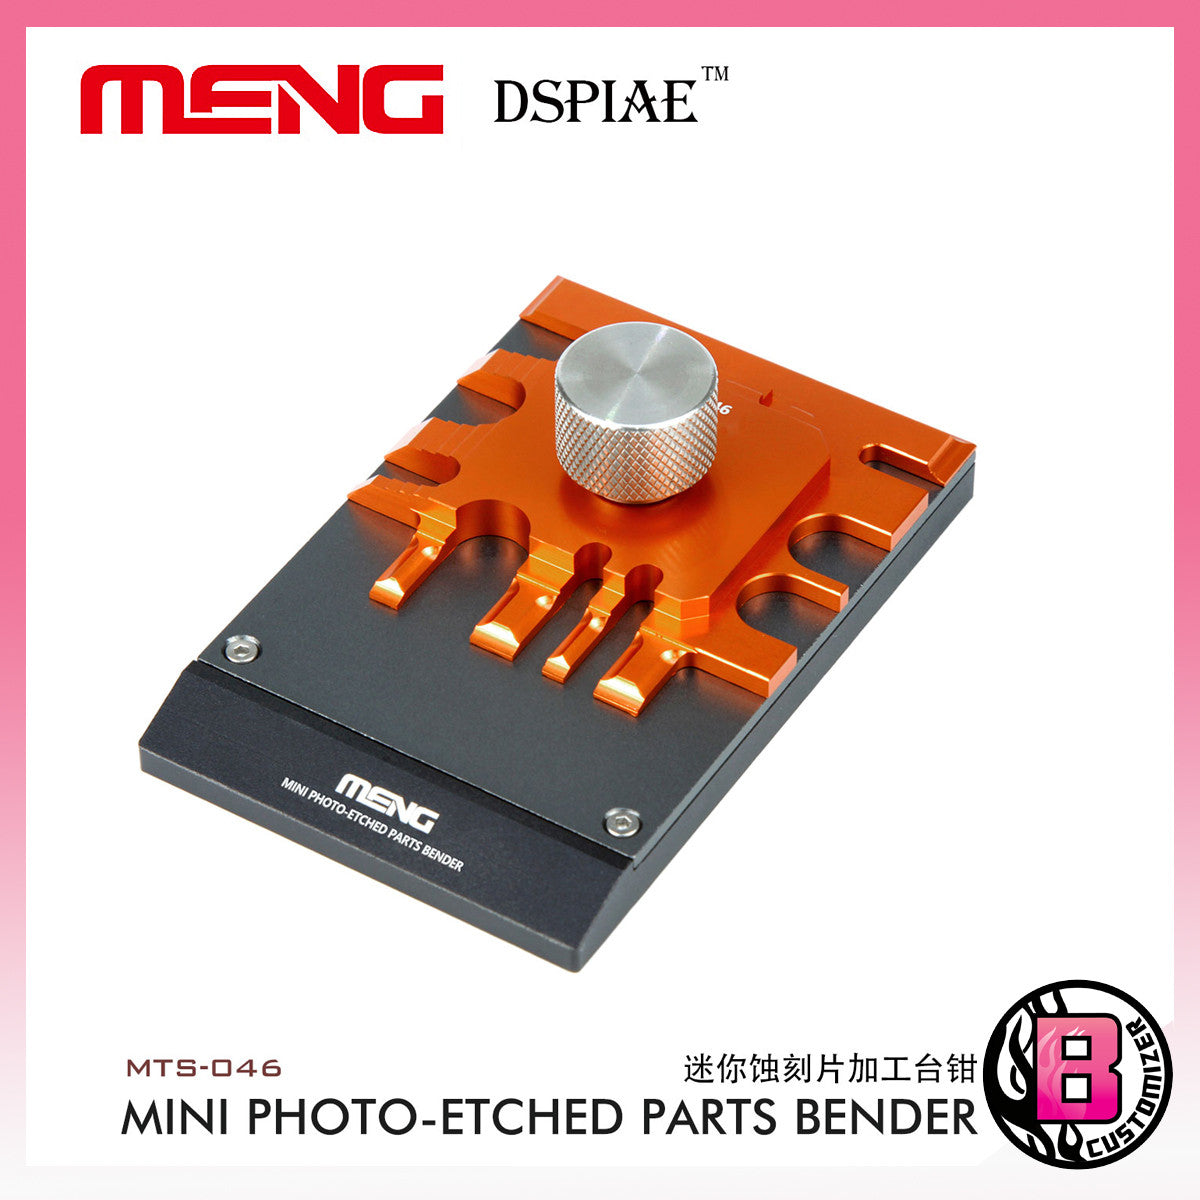 Meng X DSPIAE Mini Photo Etch parts bender (MTS-046)